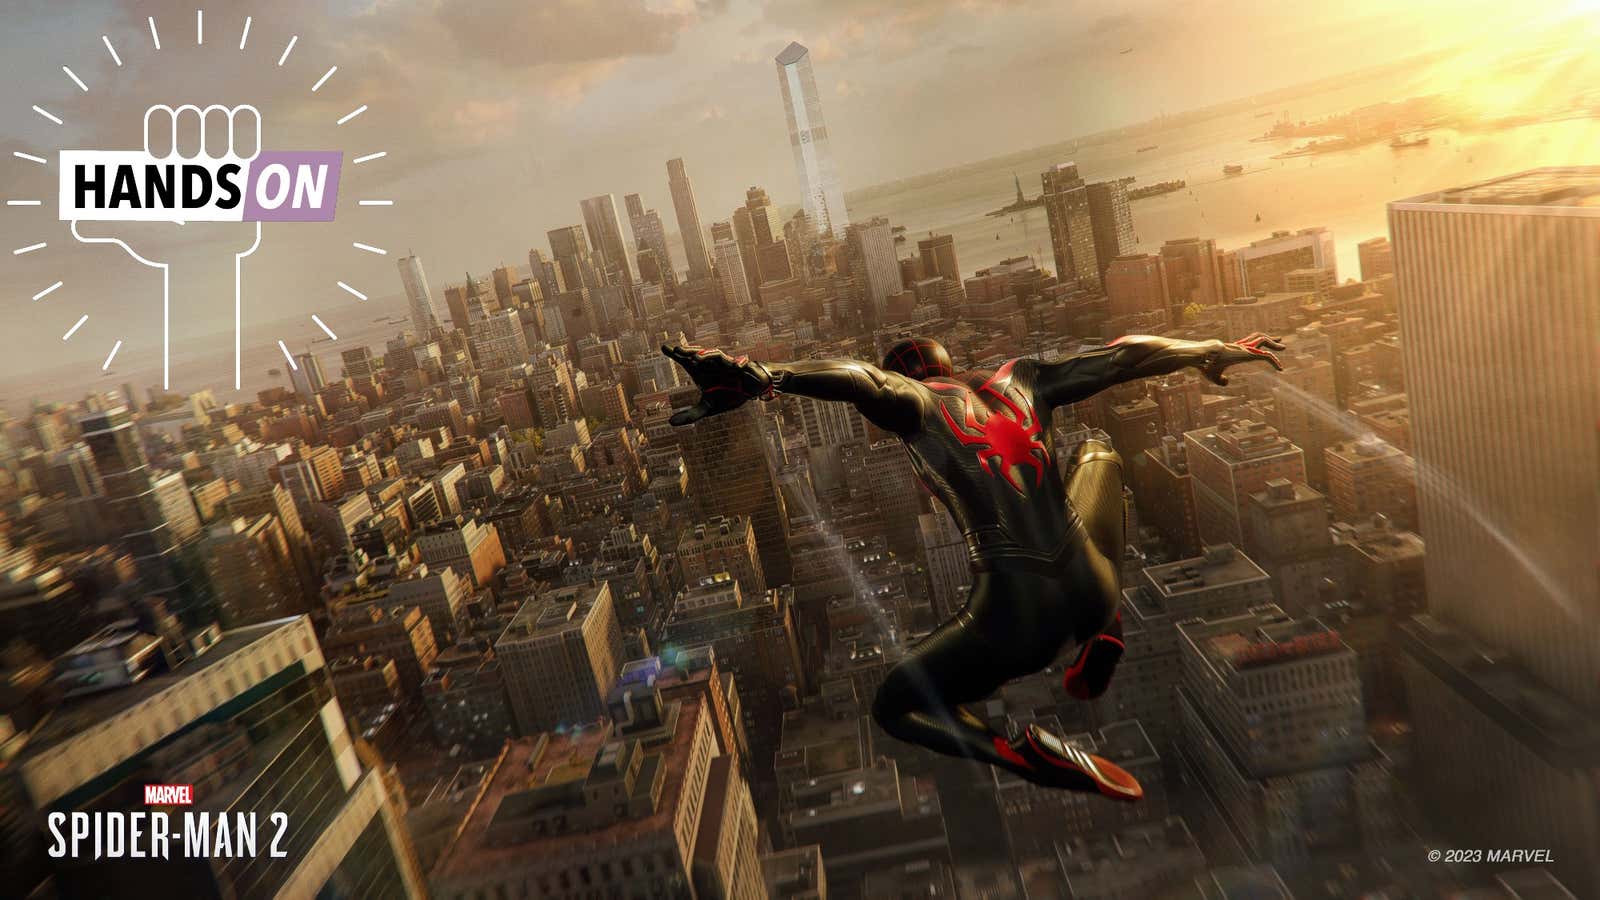 Flying through New York is even better in Spider-Man 2.